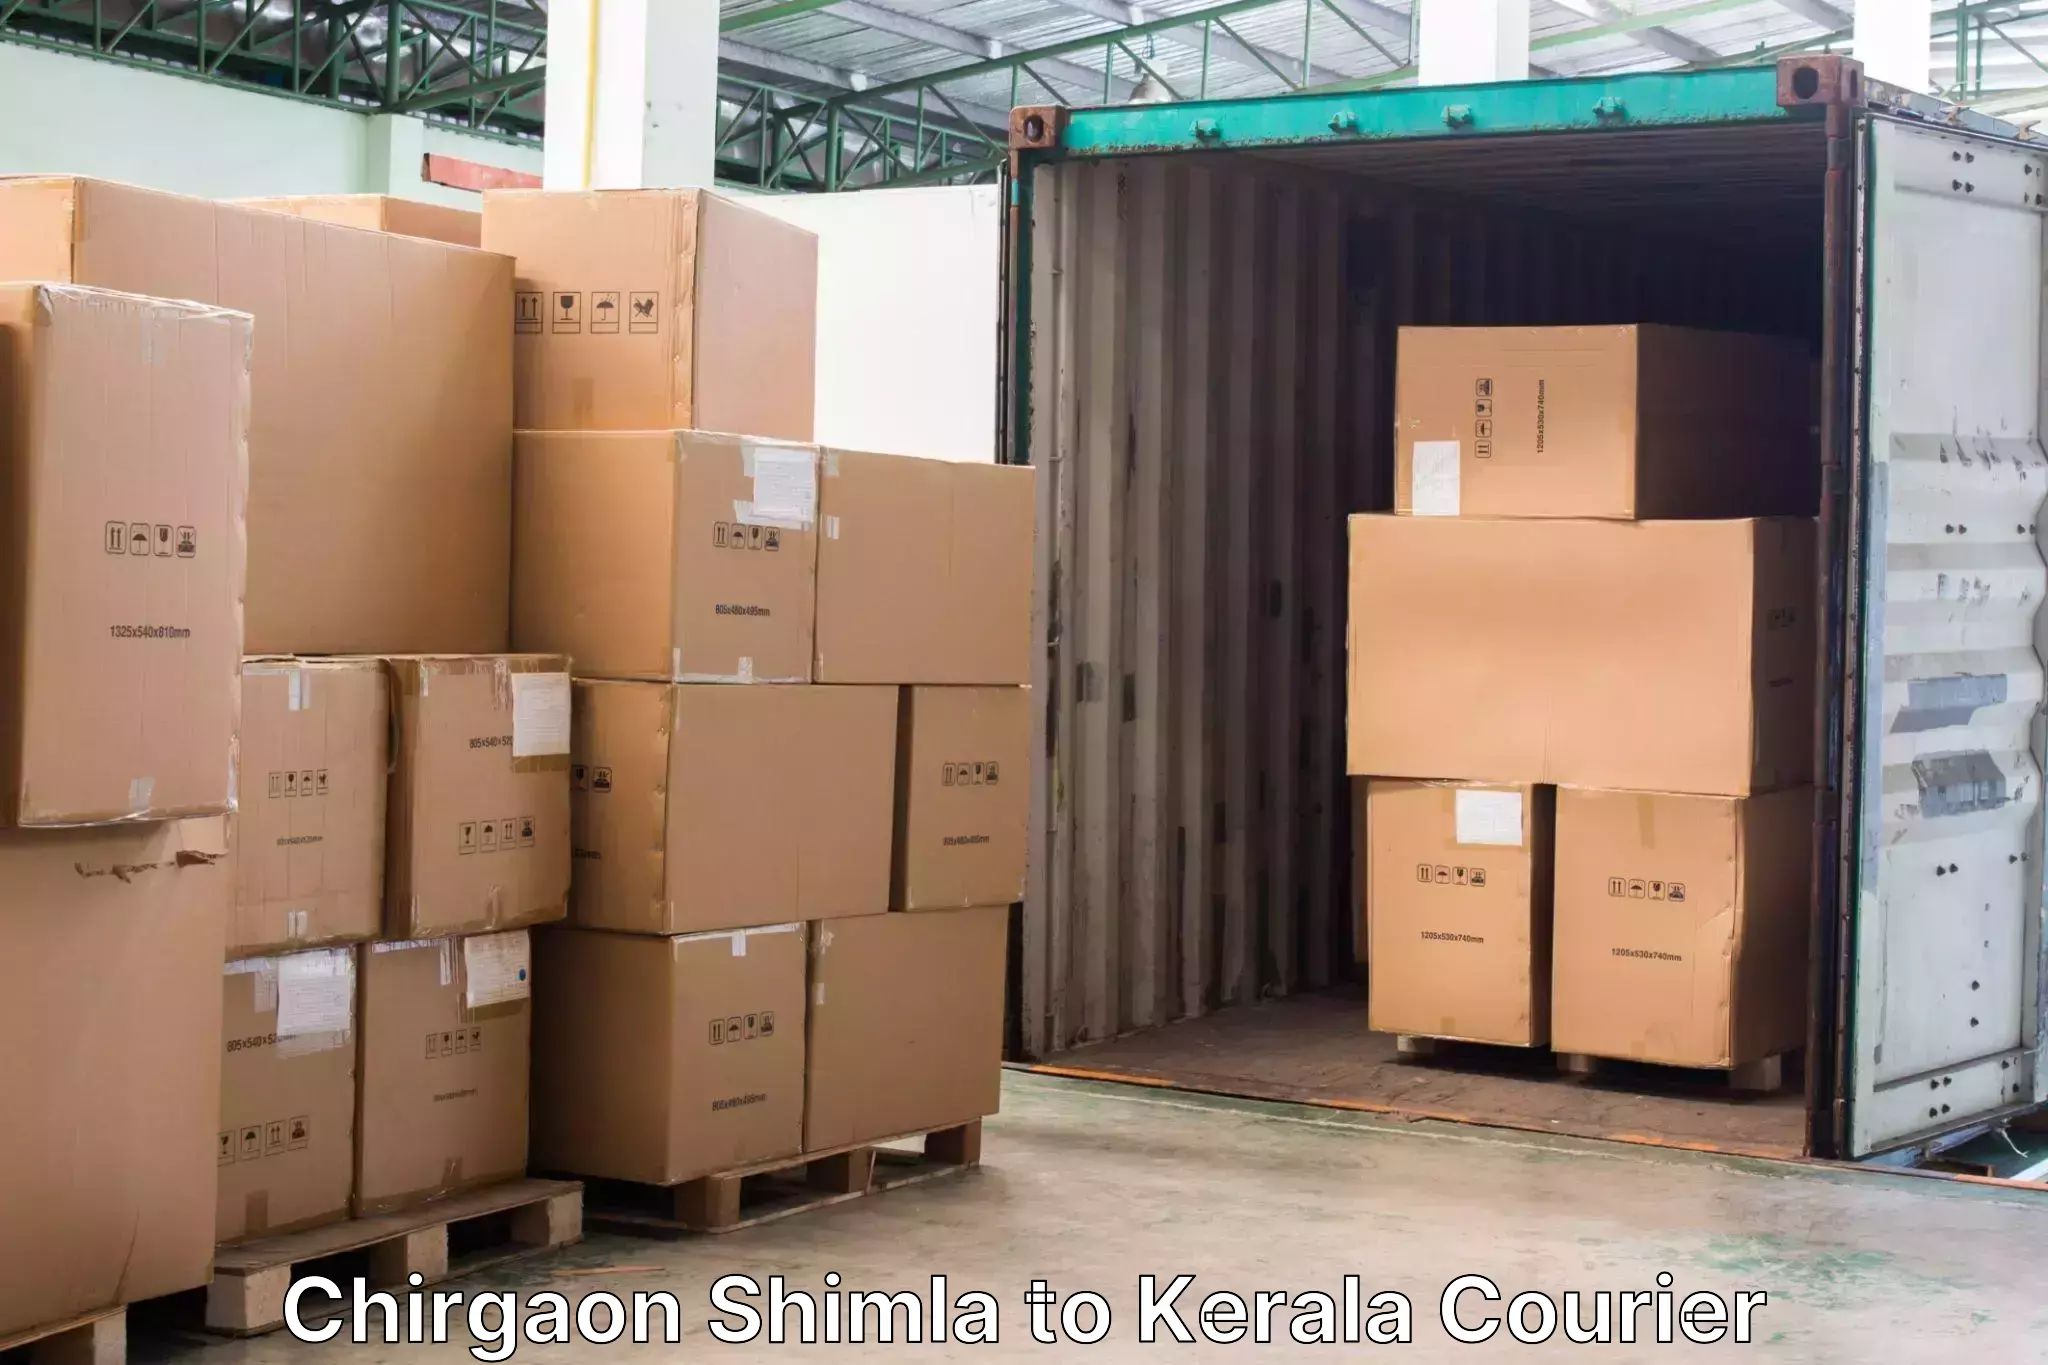 Express baggage shipping Chirgaon Shimla to Cochin University of Science and Technology